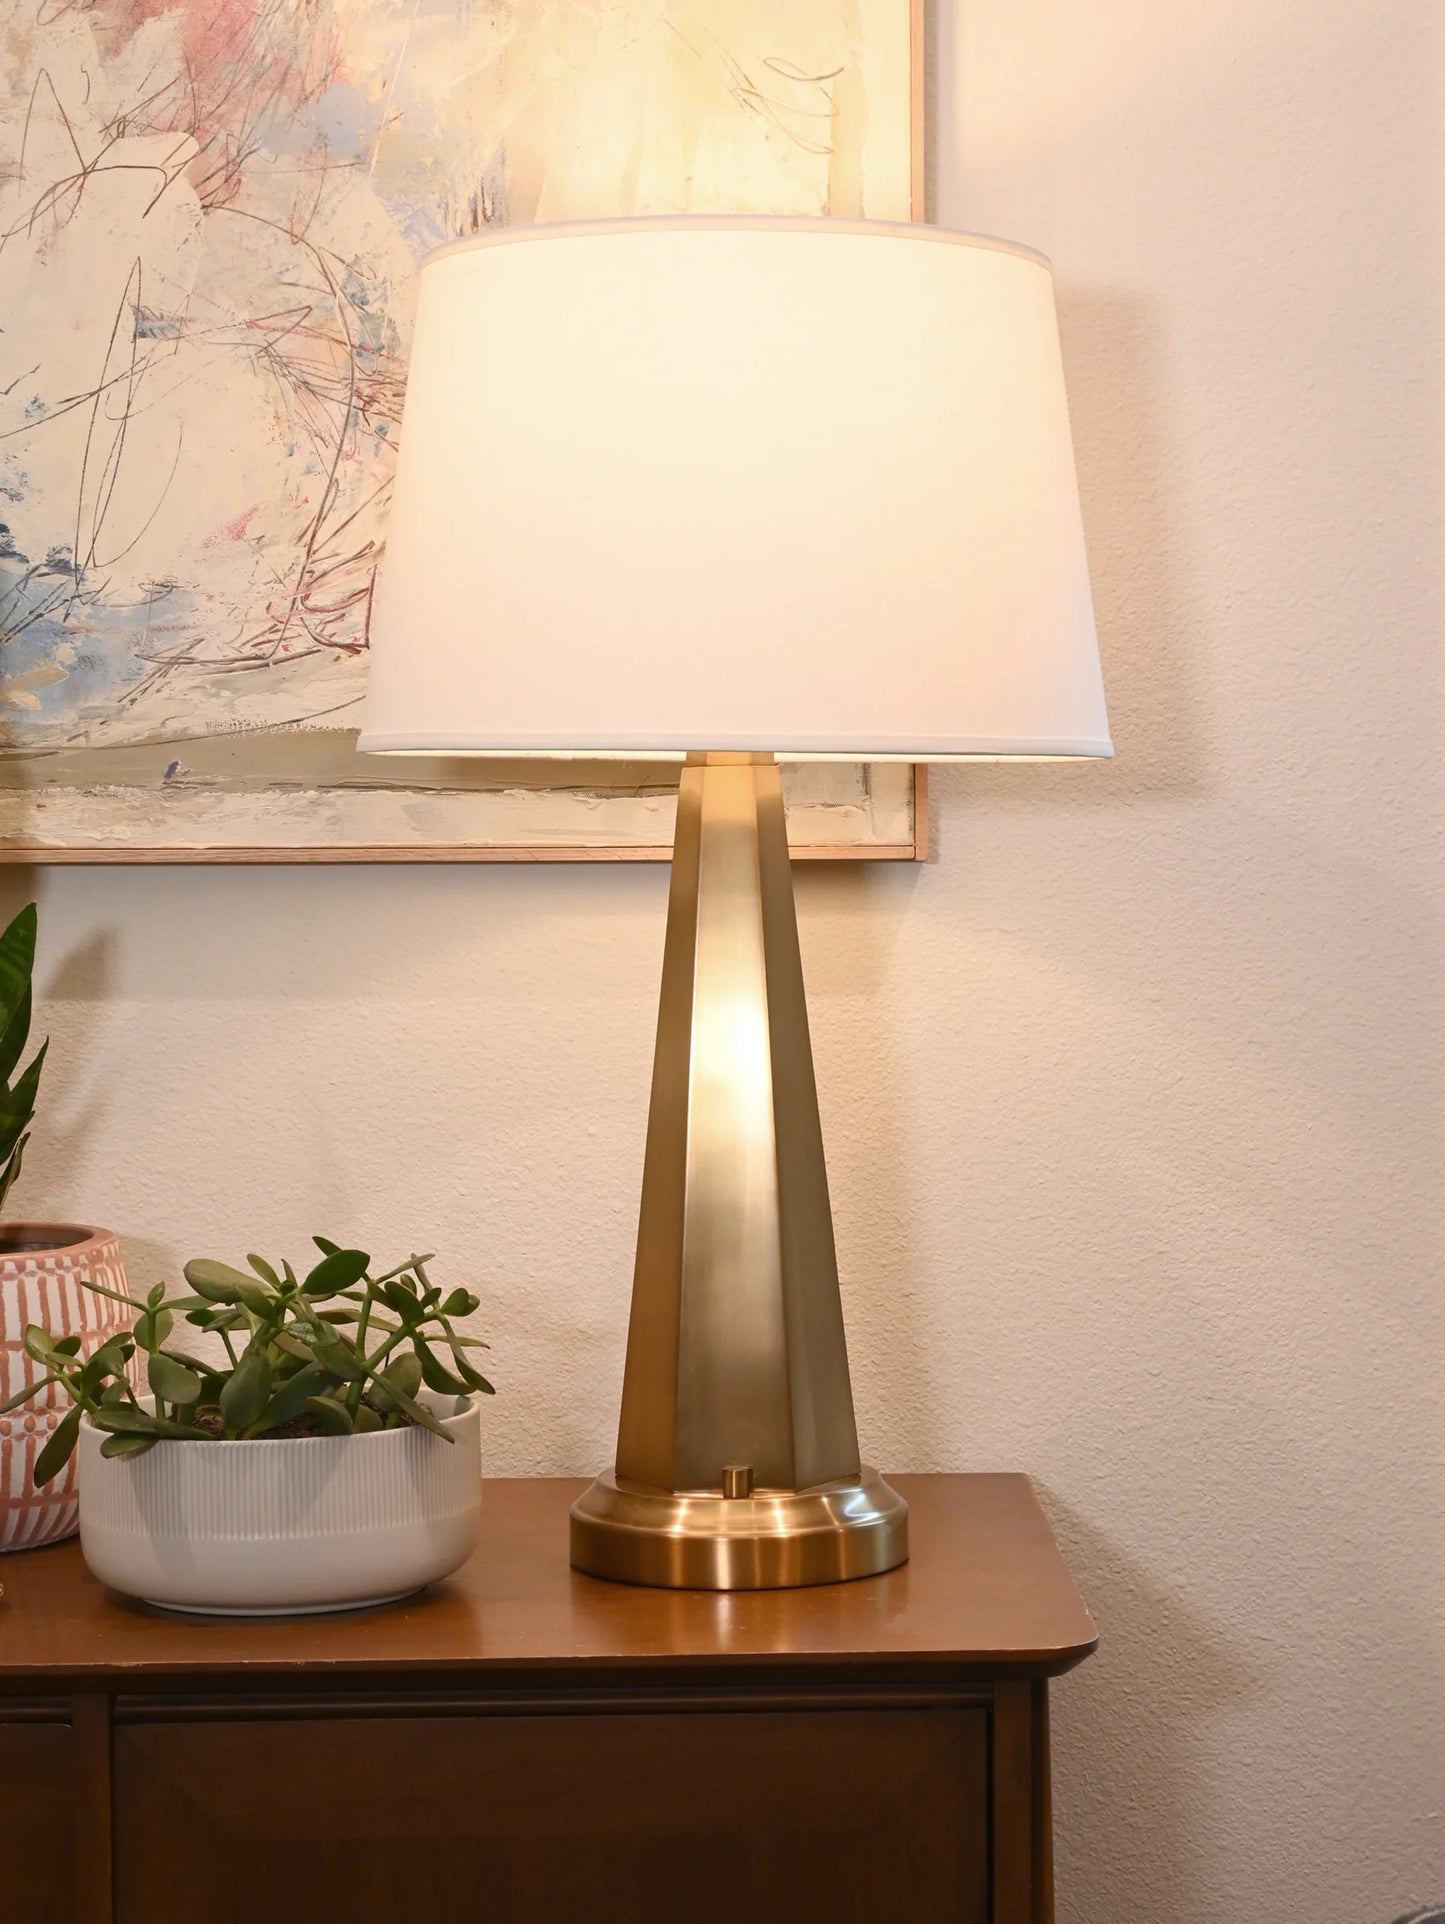 Cordless Lamp in Antique Brass Finish